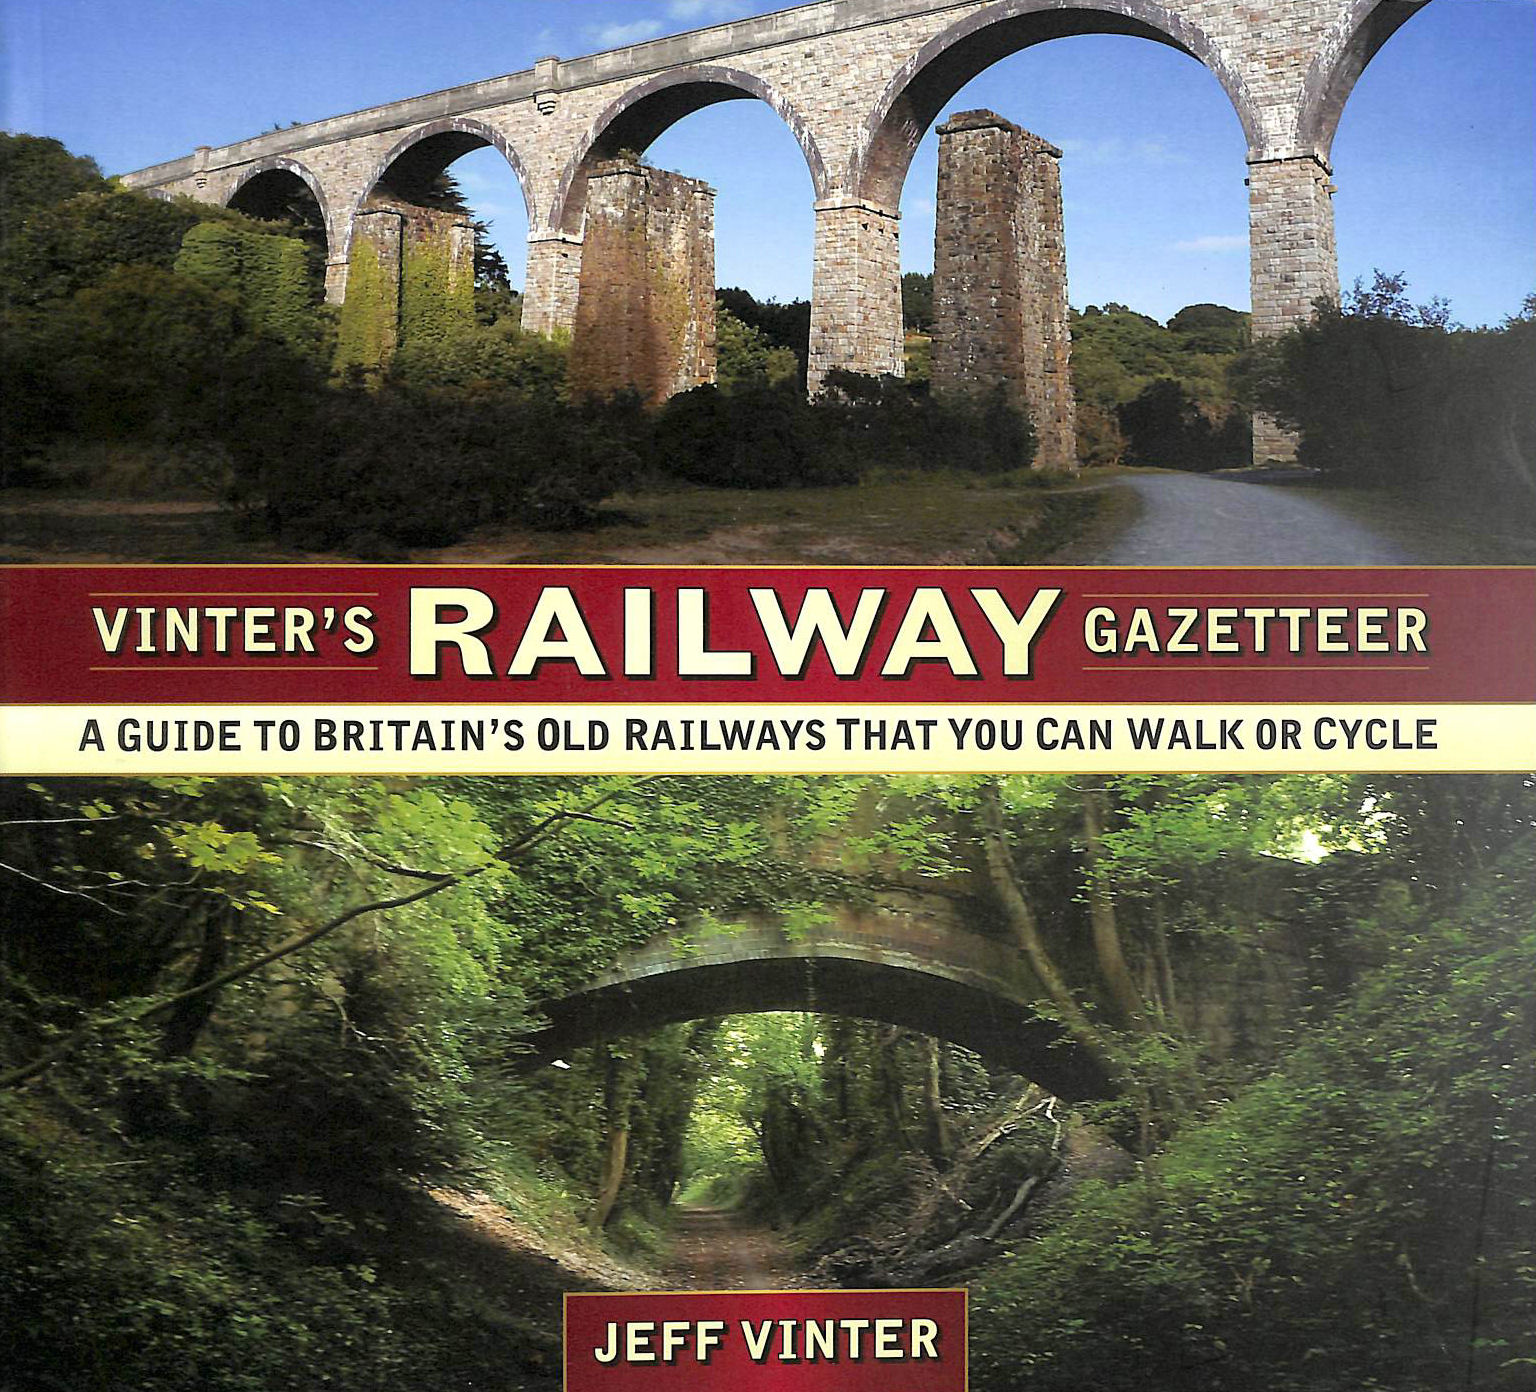 JEFF VINTER - Vinter's Railway Gazetteer: A Guide to Britain's Old Railways That You Can Walk or Cycle